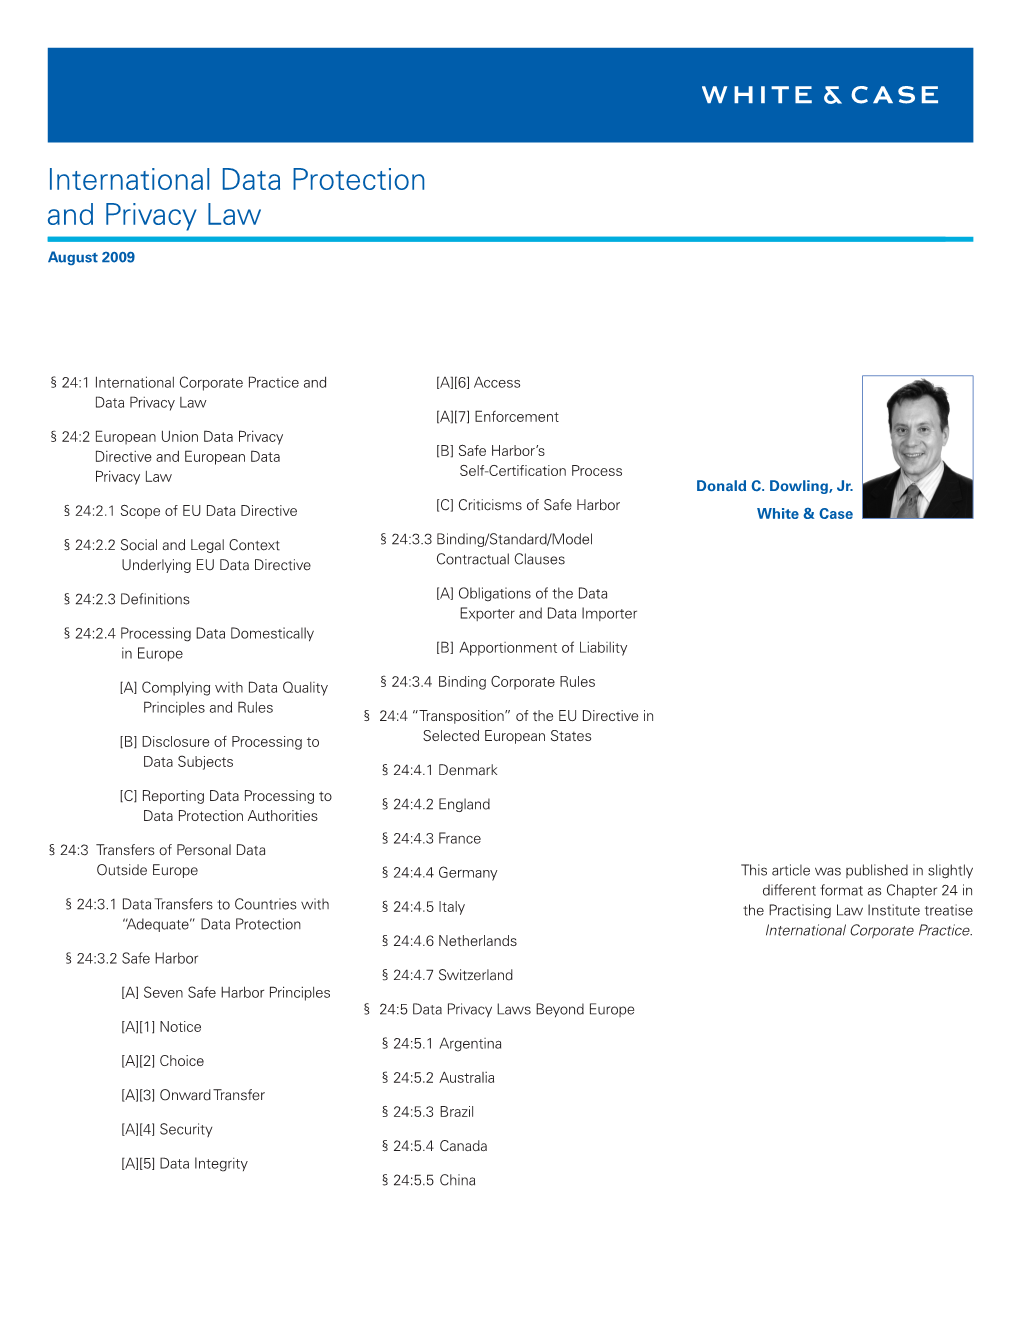 International Data Protection and Privacy Law